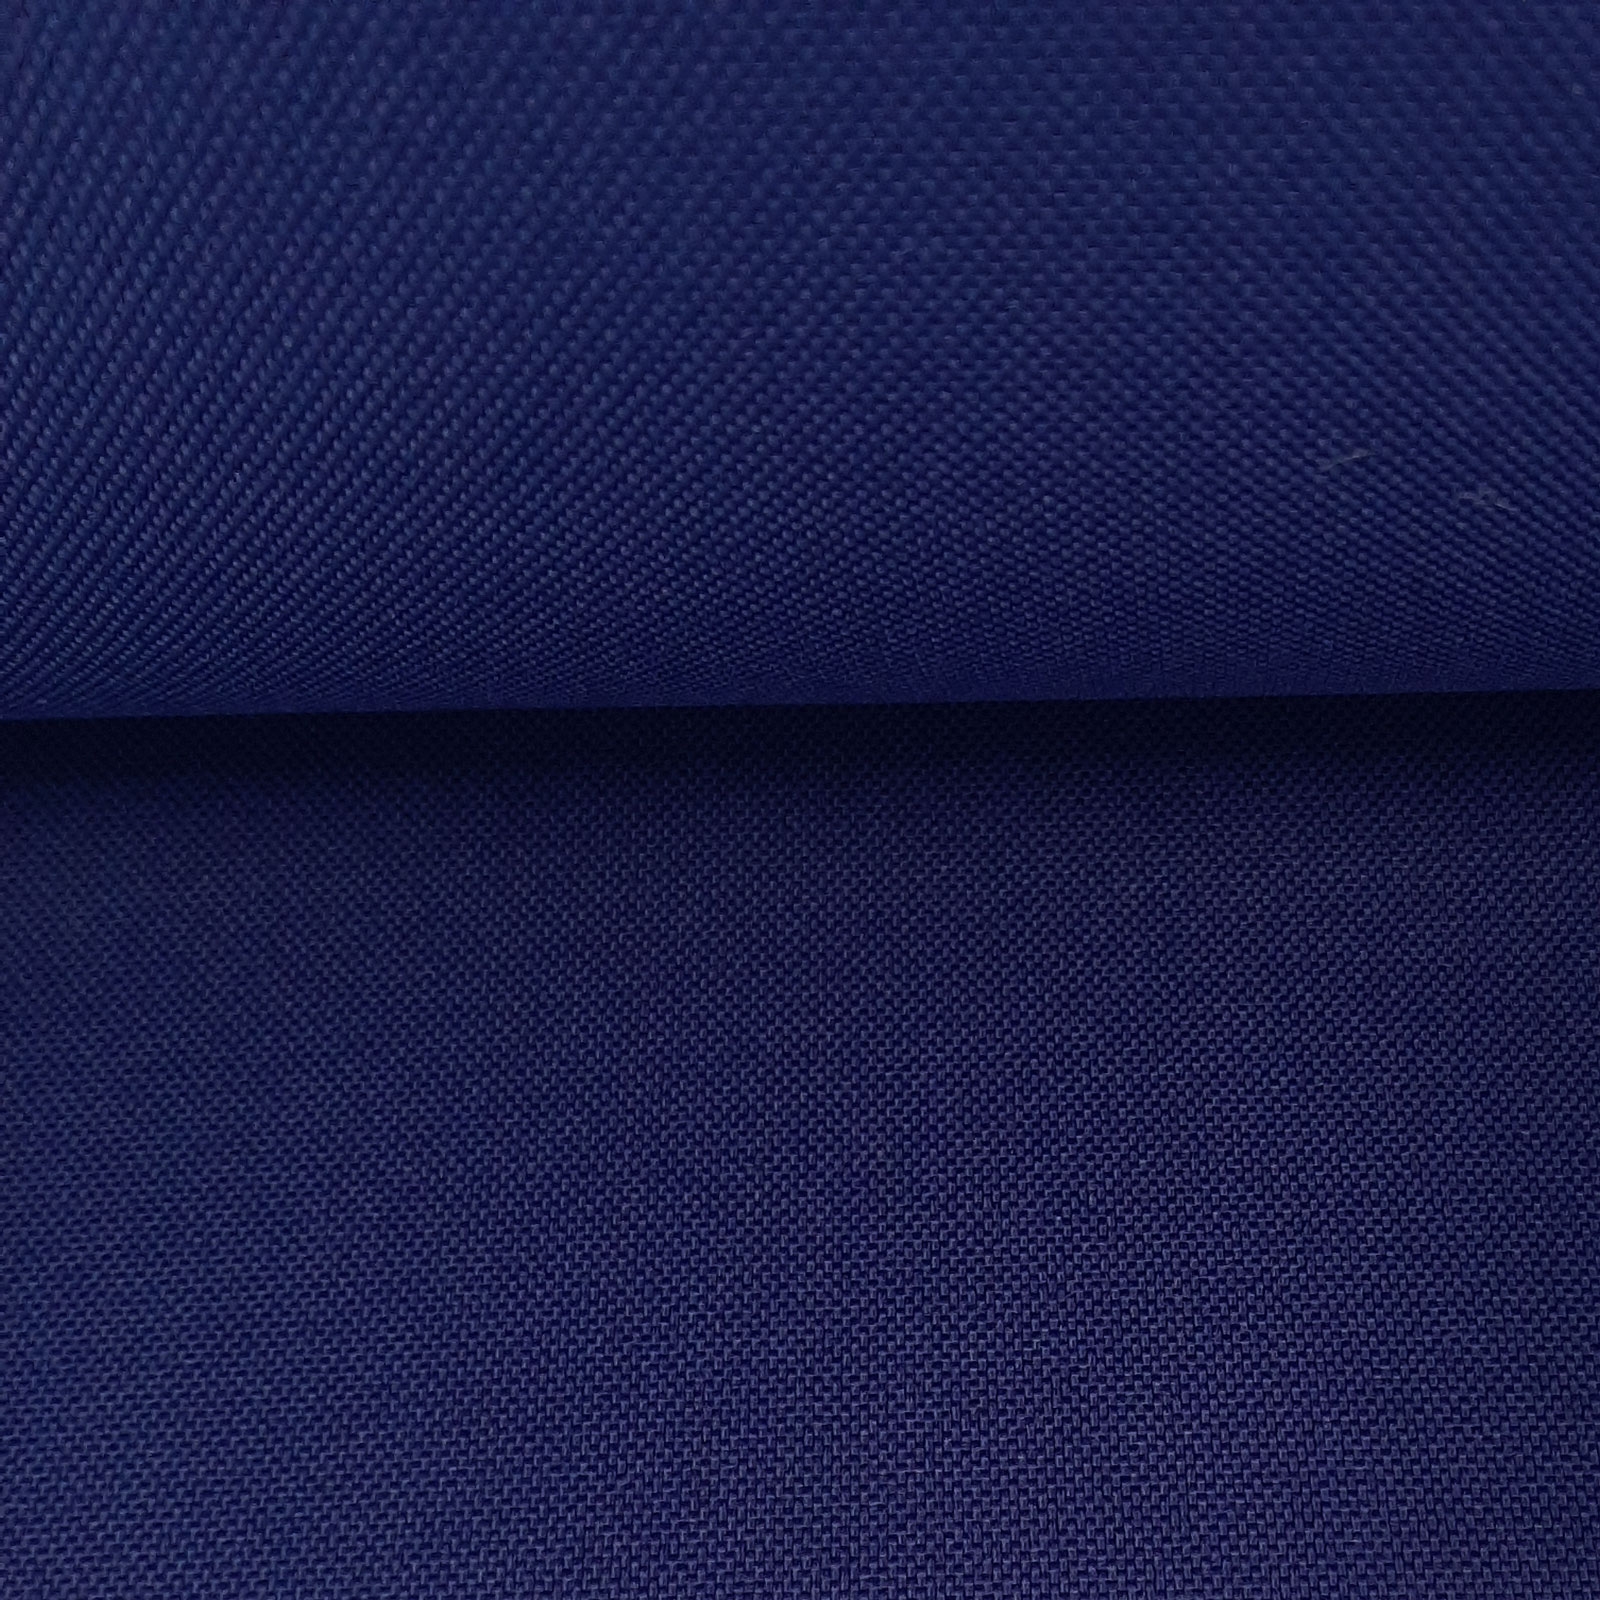 Outdoor fabric Florida with PE coating (high light fastness values) - dark blue